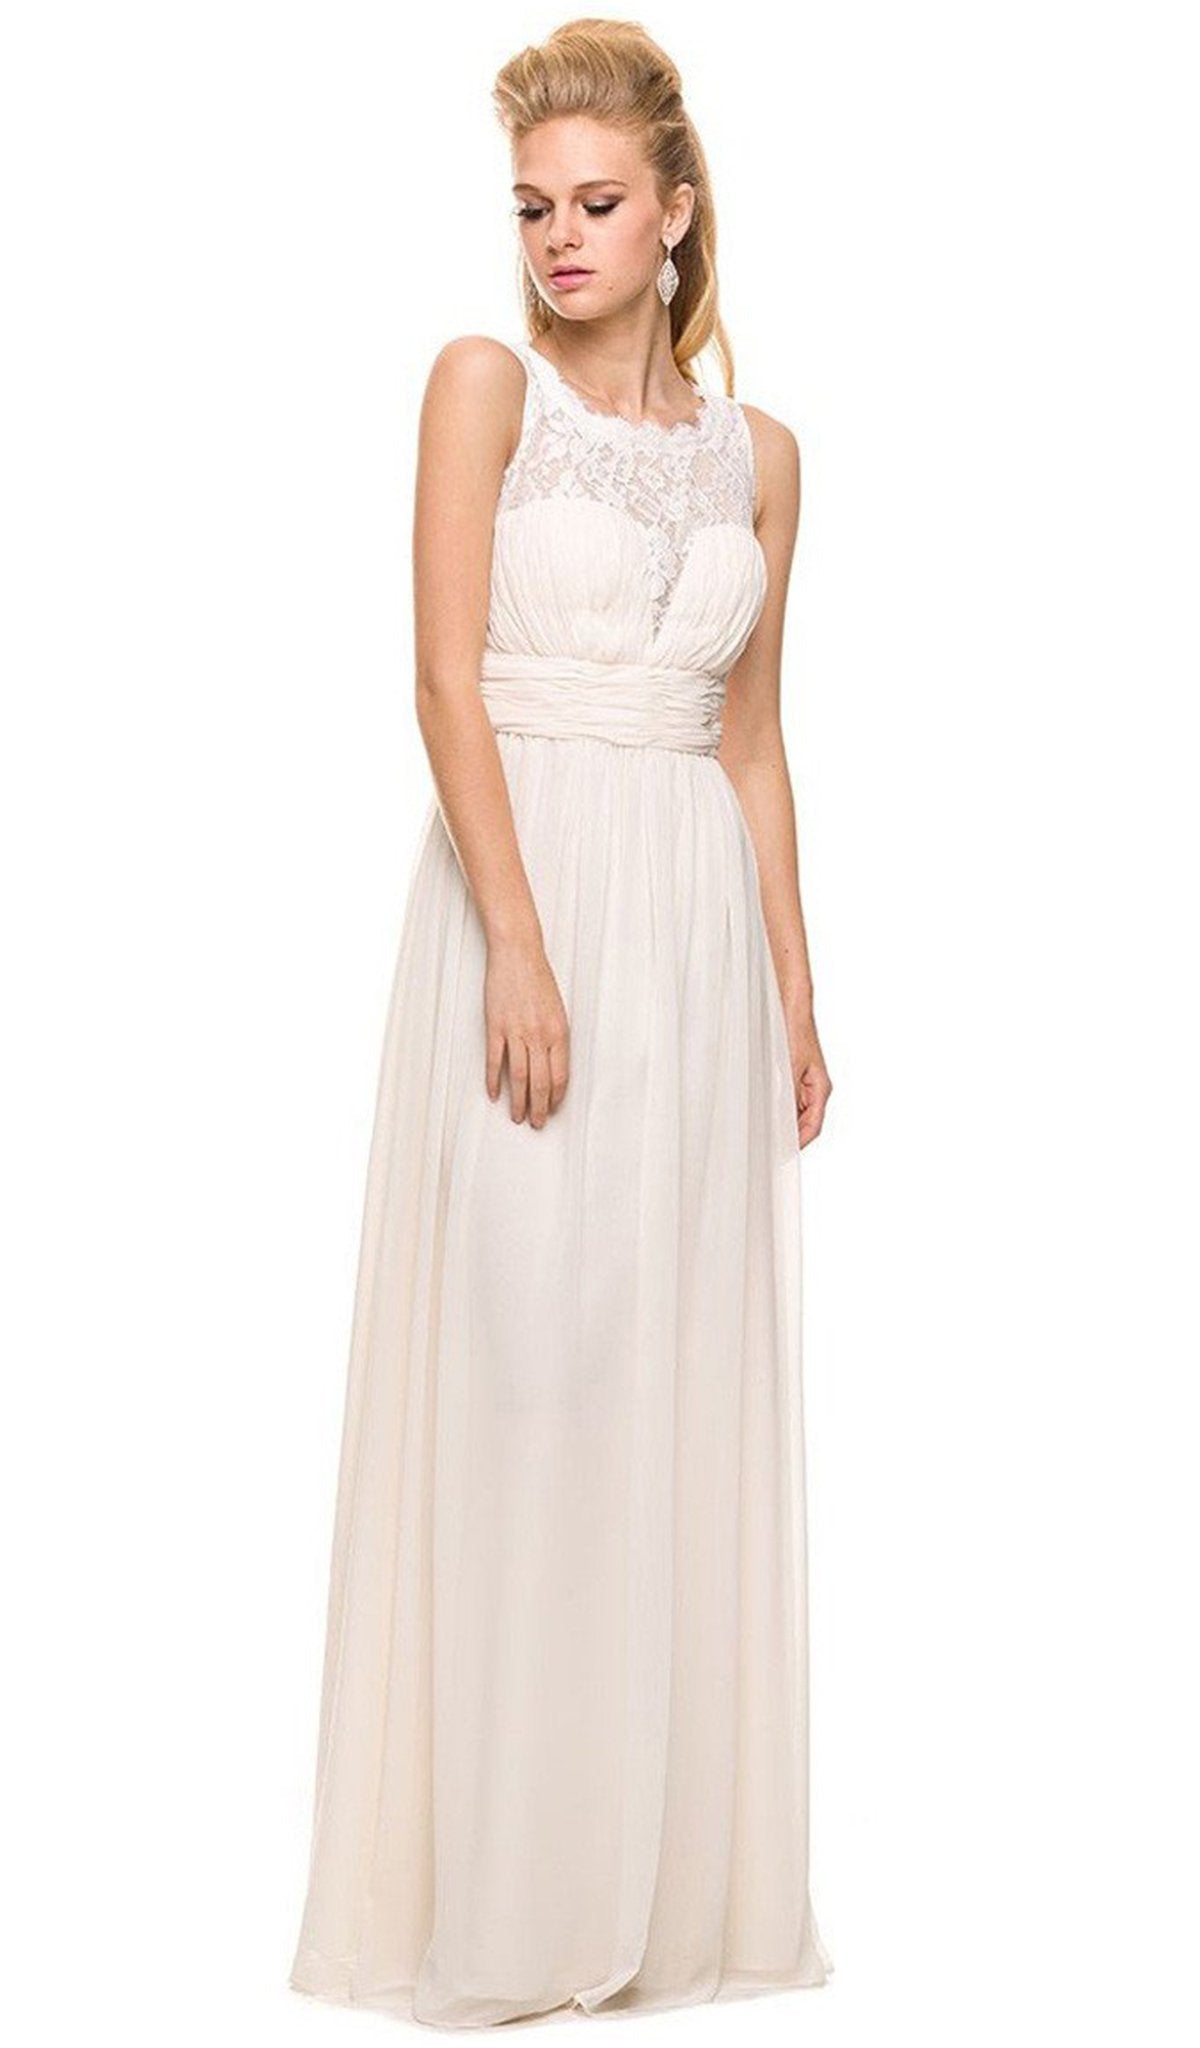 Nox Anabel - 7126 Sleeveless Lace and Chiffon A-Line Evening Dress Special Occasion Dress XS / Ivory